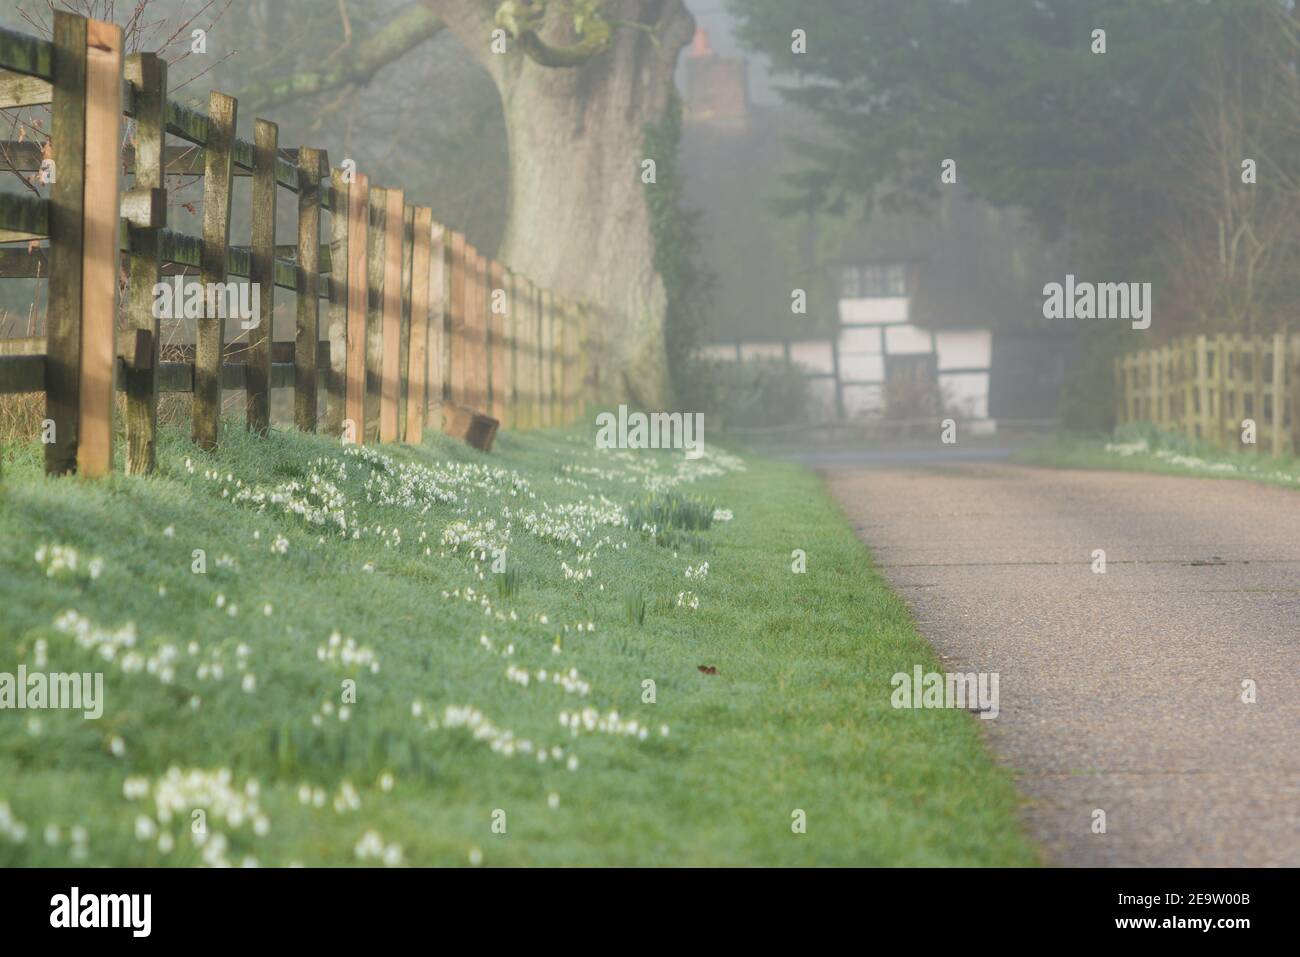 Avon Valley footpath, Burgate, Fordingbridge, New Forest, Hampshire, UK, 6th February, 2021, Weather: Mist and fog shroud the countryside and temperatures are close to freezing early morning ahead of a period of very cold weather. Snowdrops shine through the murky conditions. Credit: Paul Biggins/Alamy Live News Stock Photo